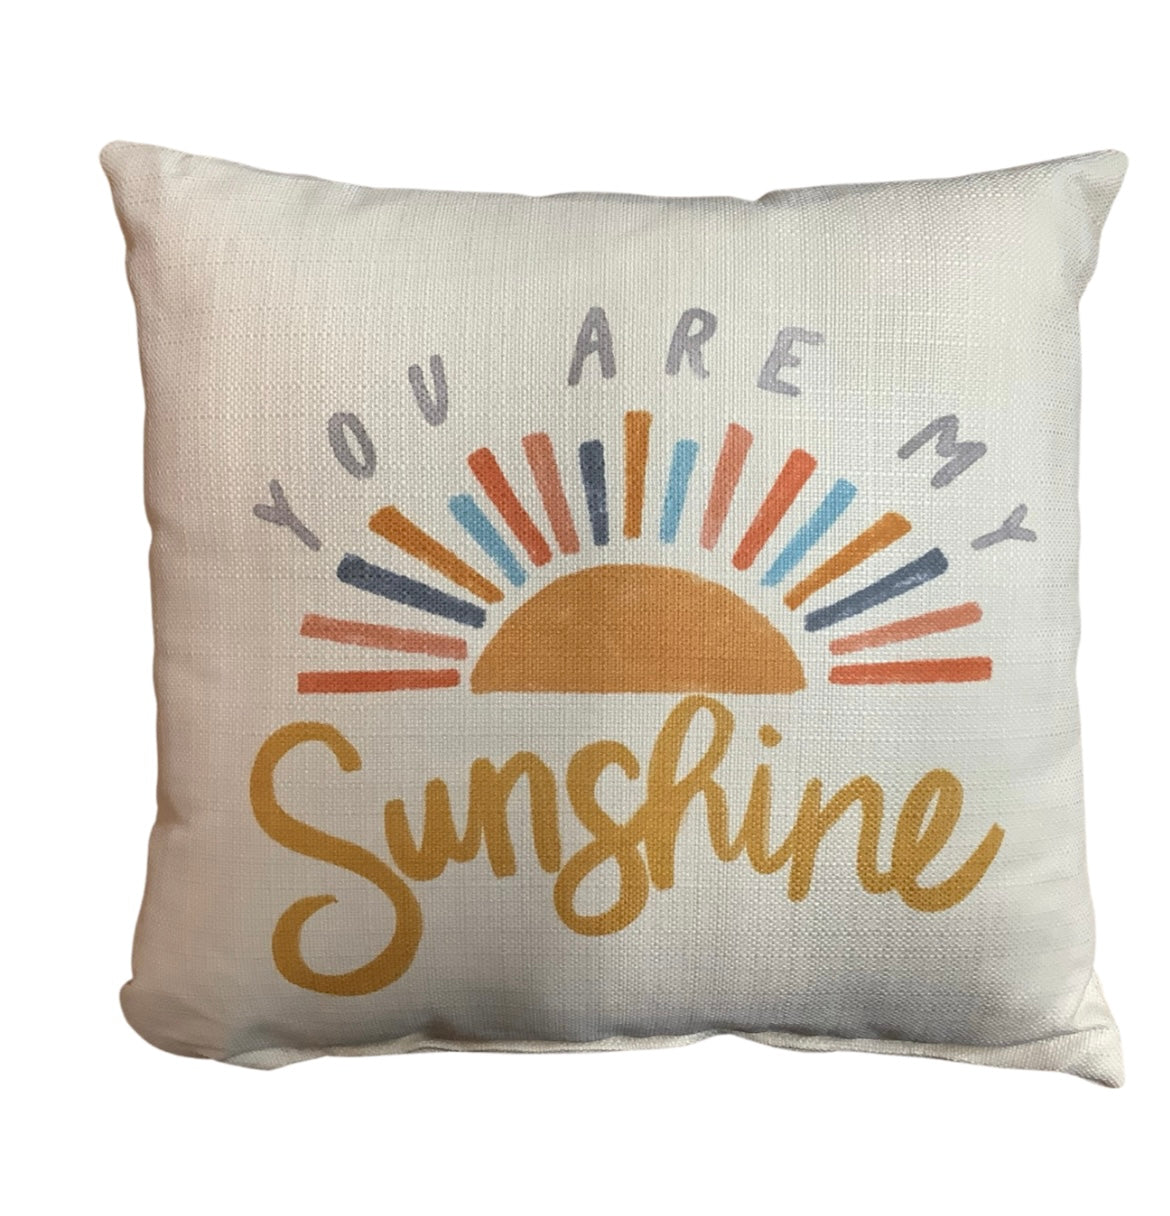 You are my Sunshine pillow